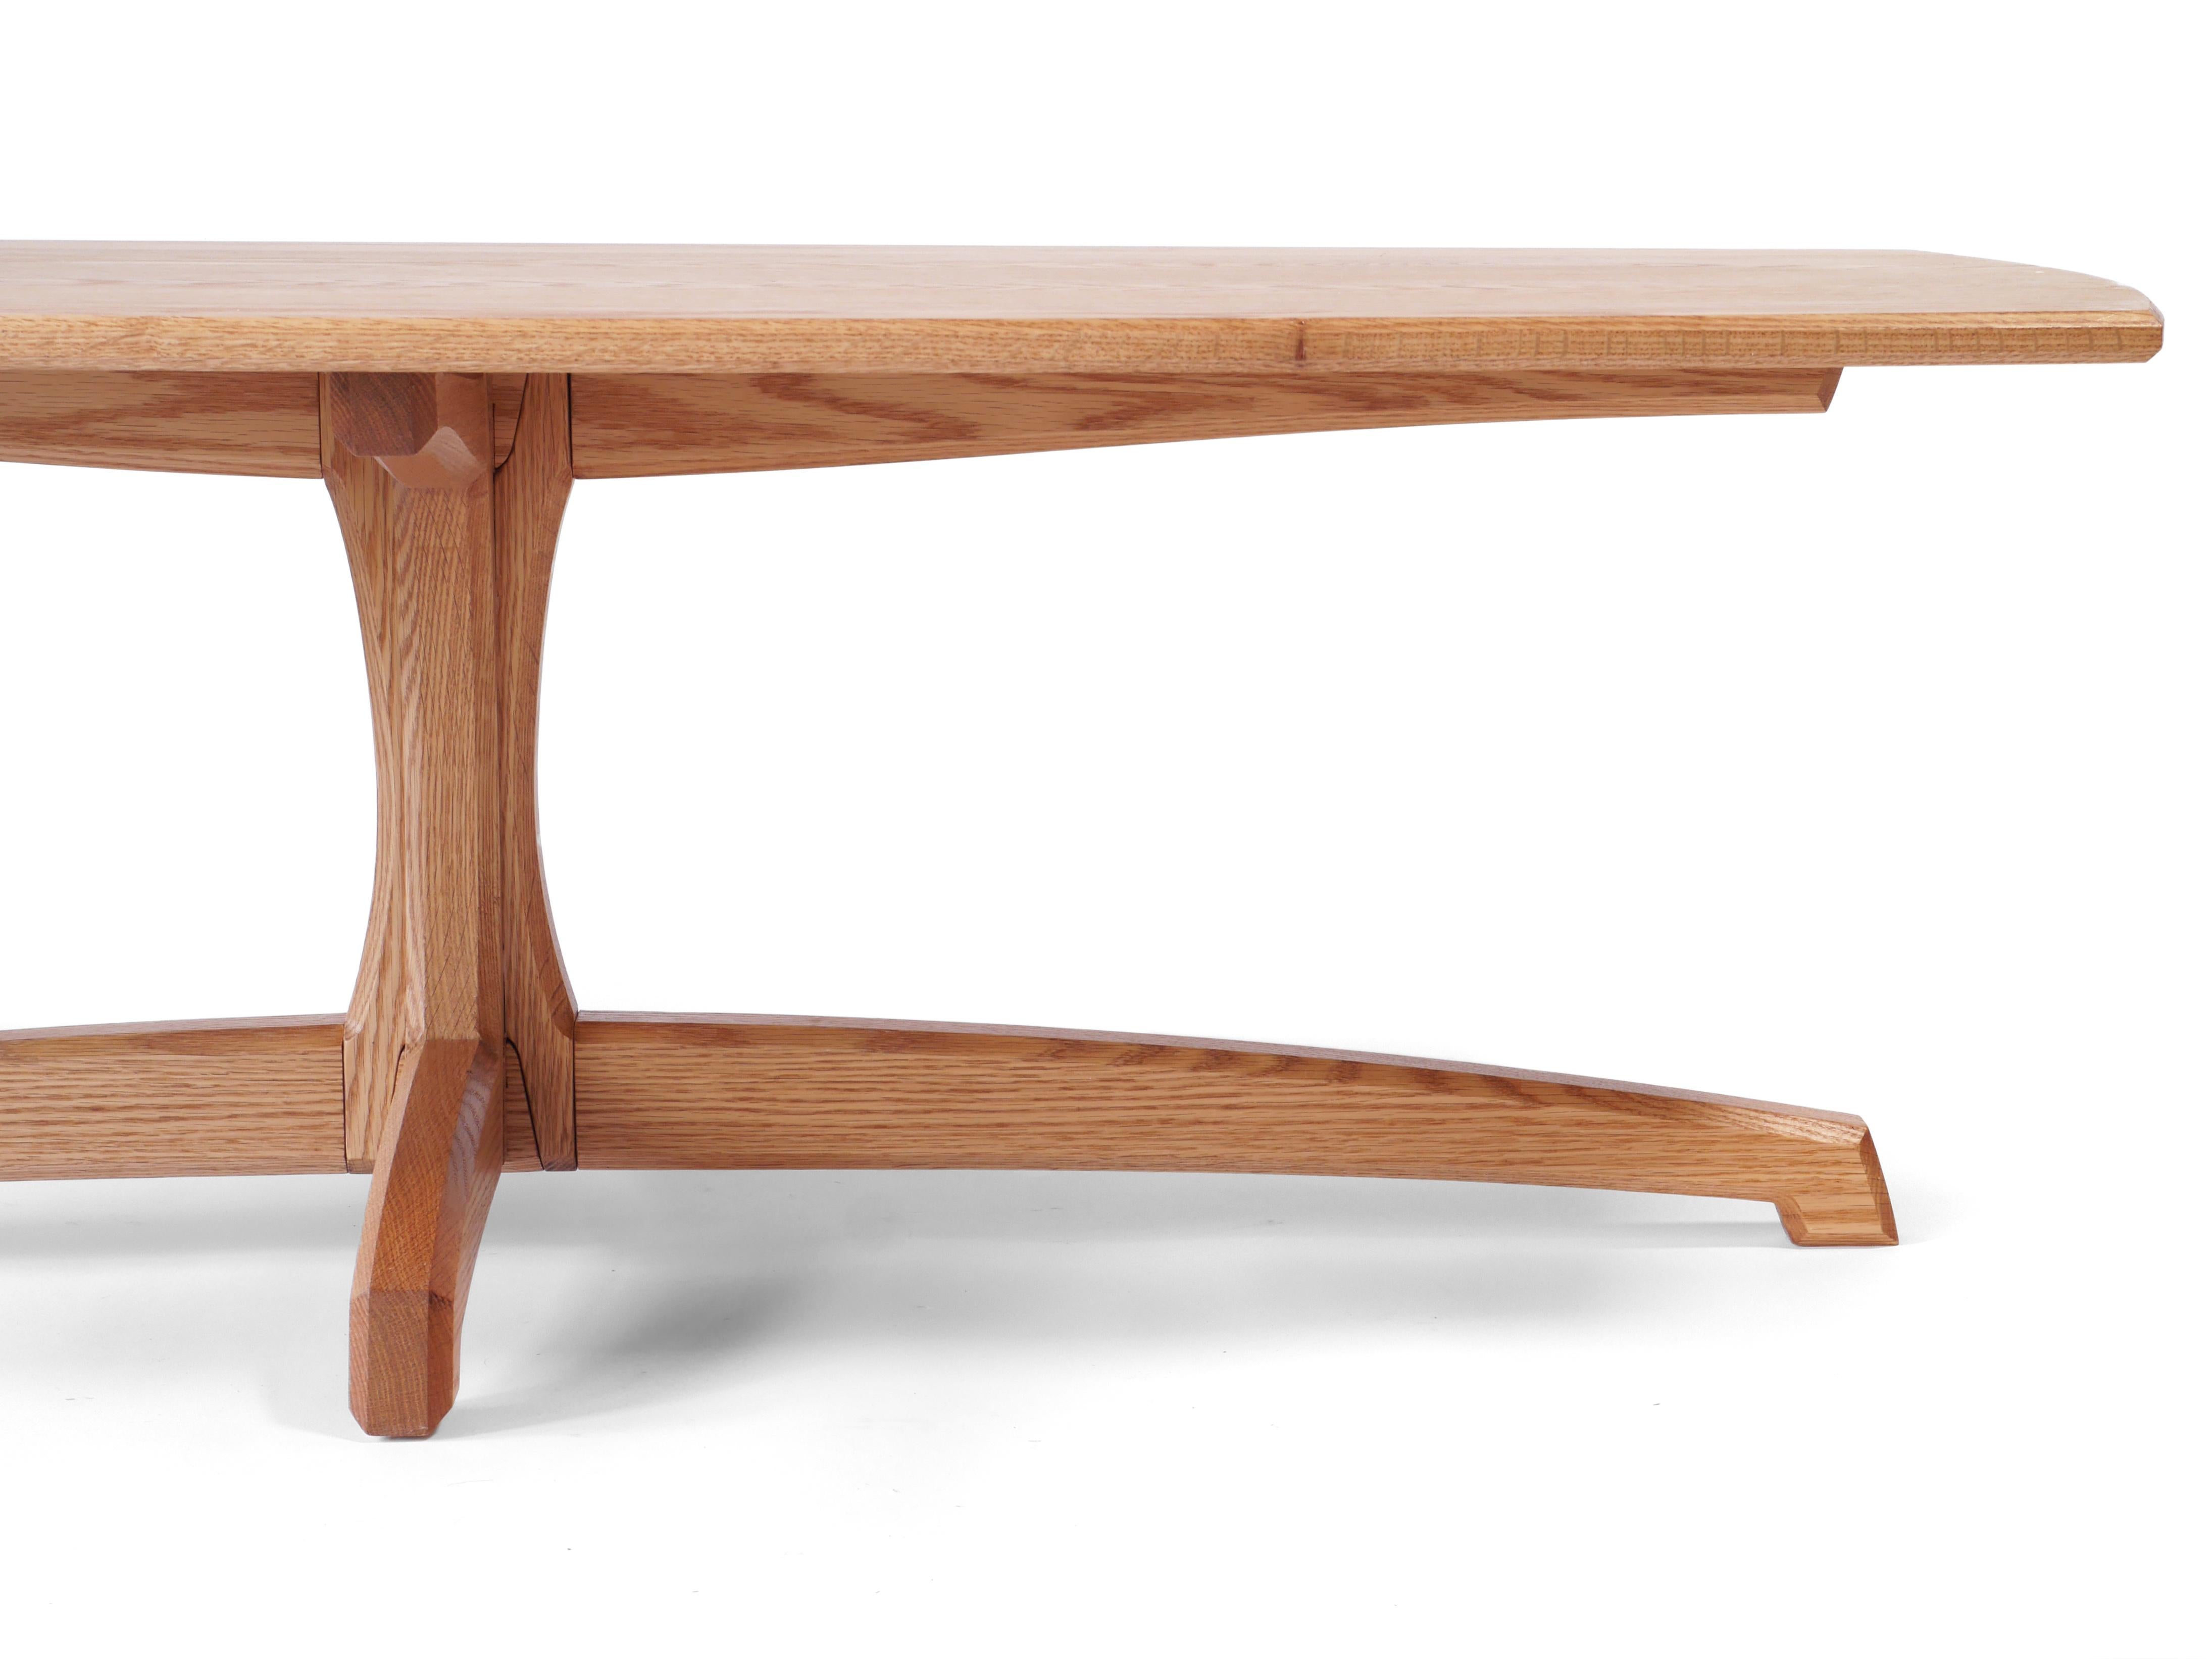 Oak Plume Coffee Table, Contemporary Pedestal Living Room Table by Arid In New Condition For Sale In Albuquerque, NM